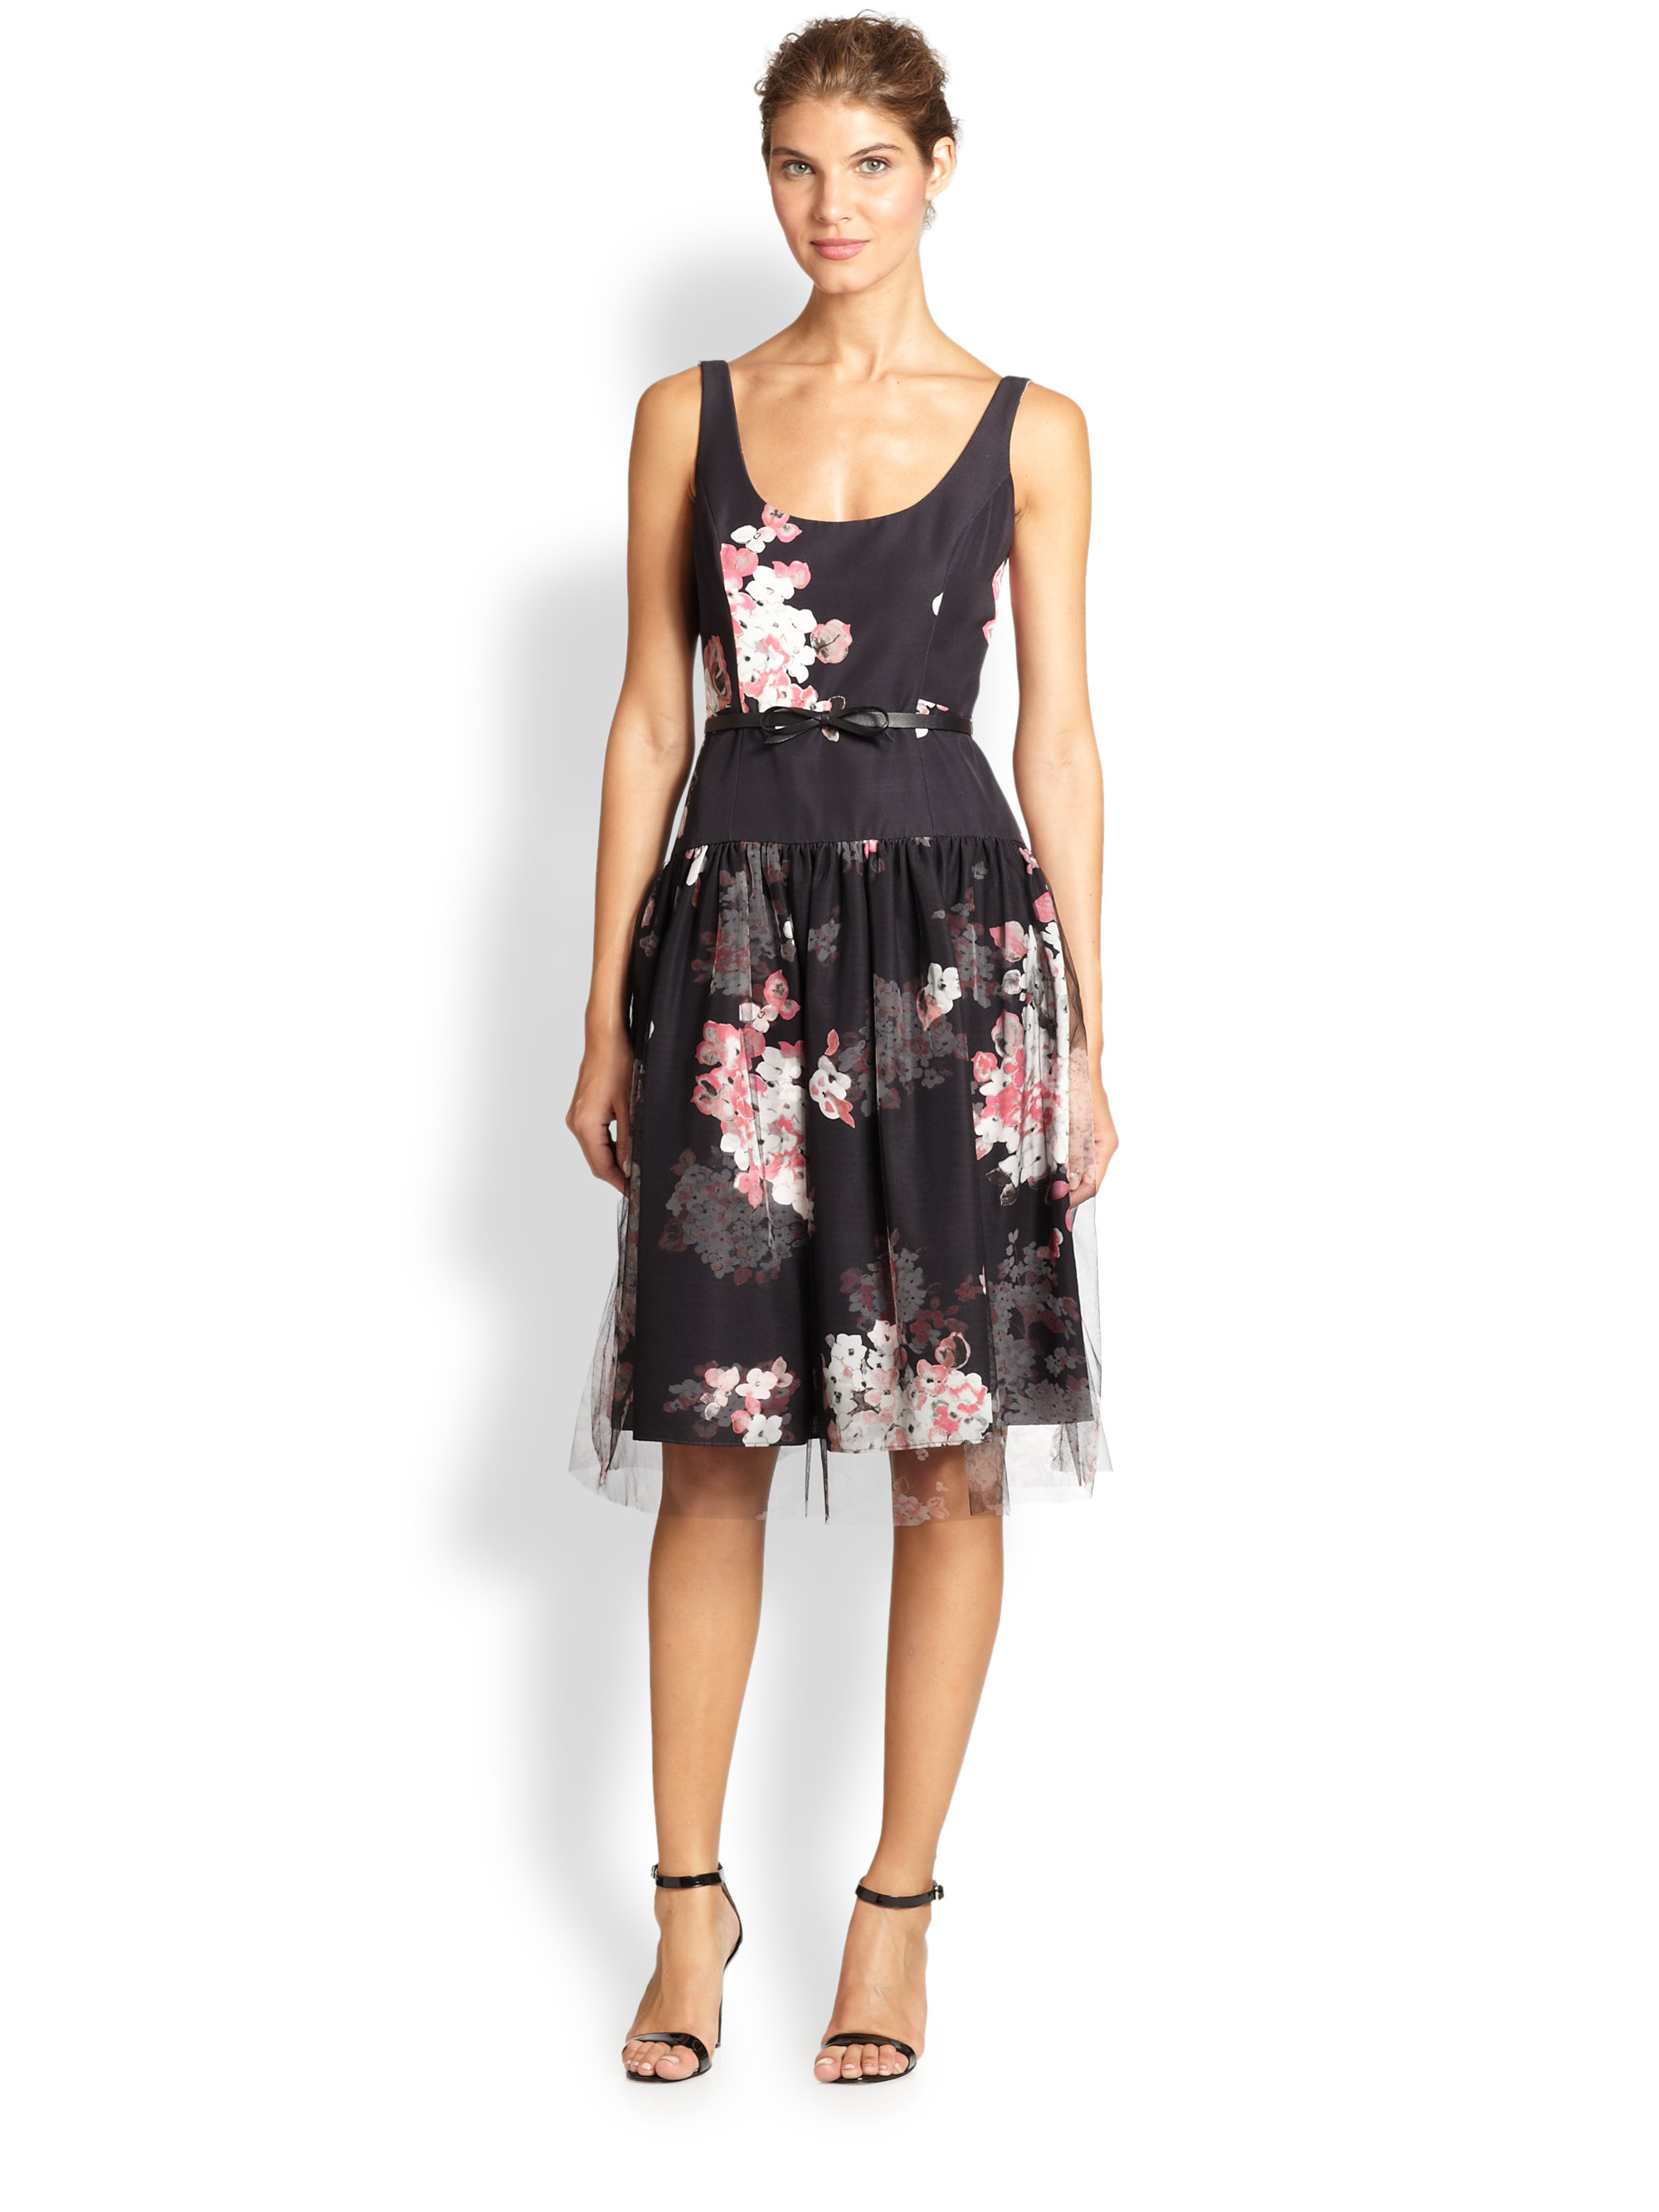 MILLY Floral Tulle-Skirt Dress in Candy (Black) - Lyst